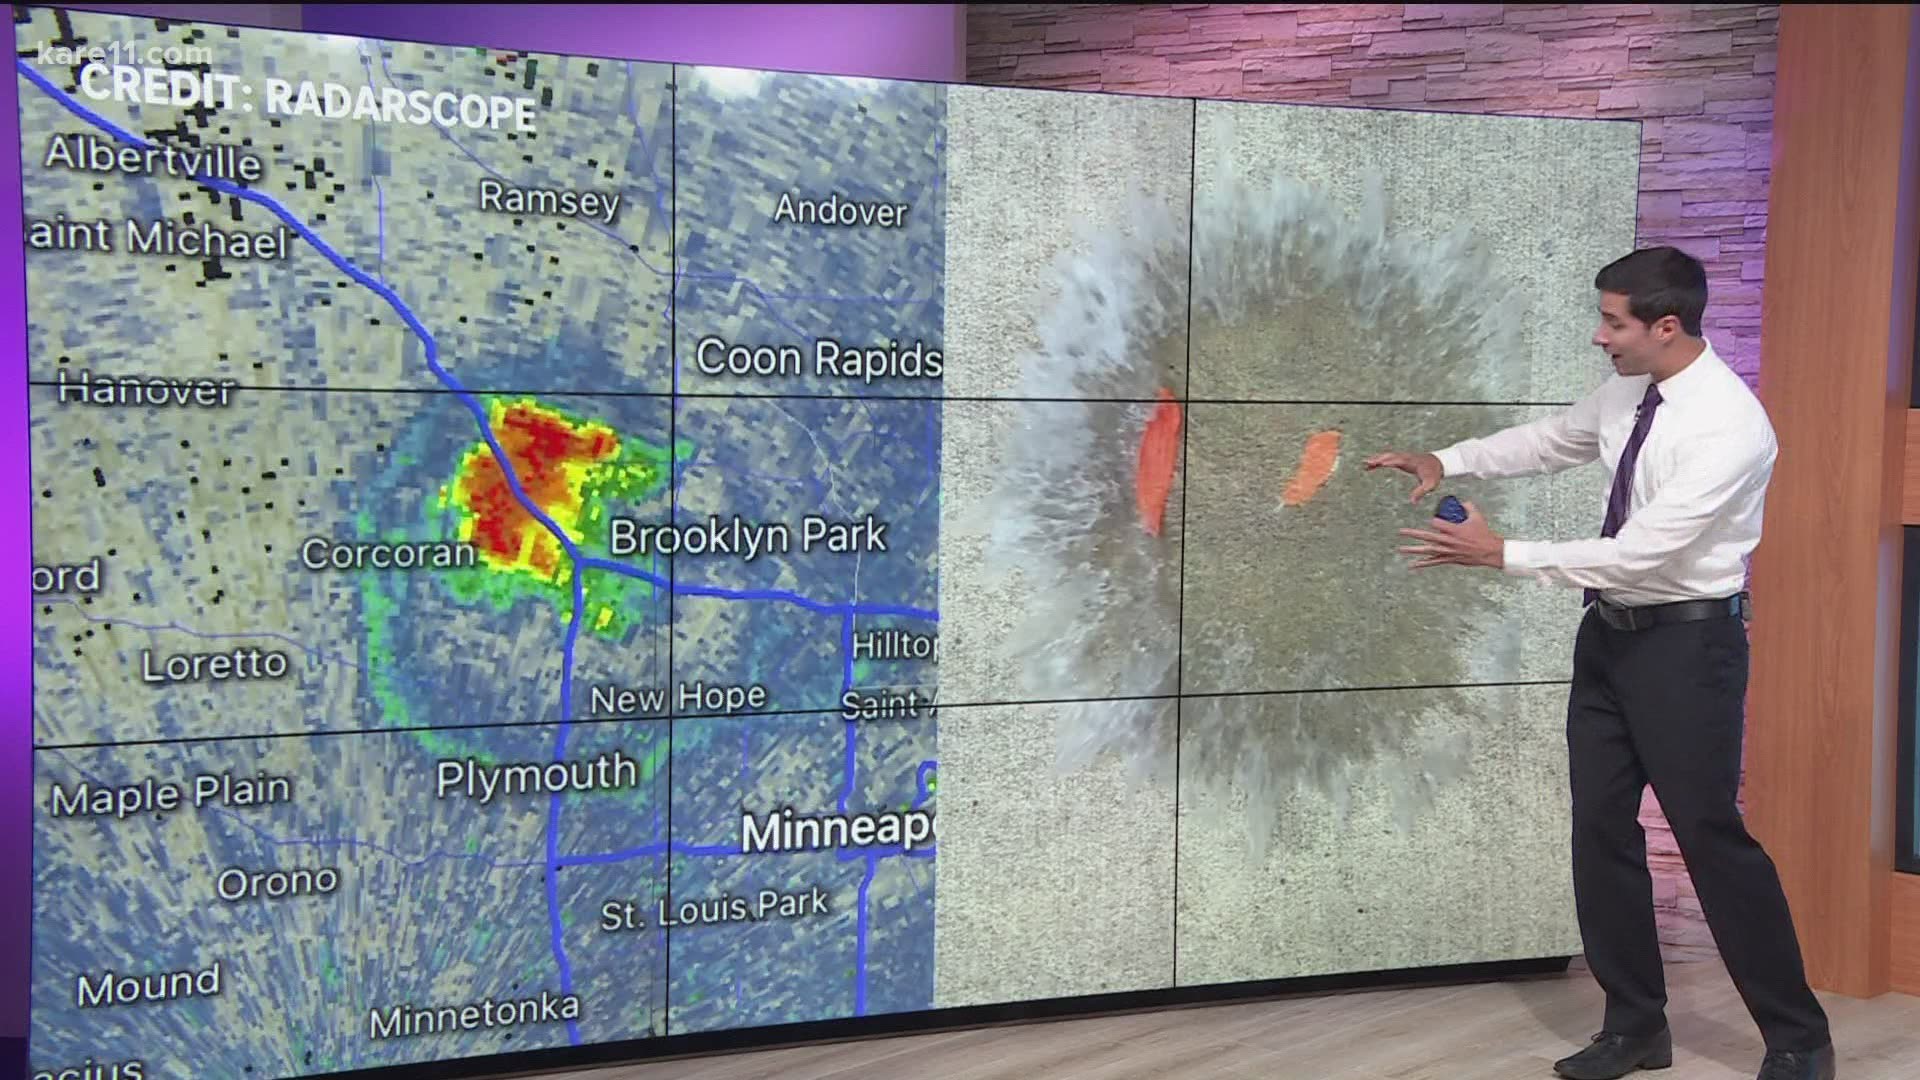 KARE 11 meteorologist Ben Dery describes what outflow boundaries are and how they're formed.